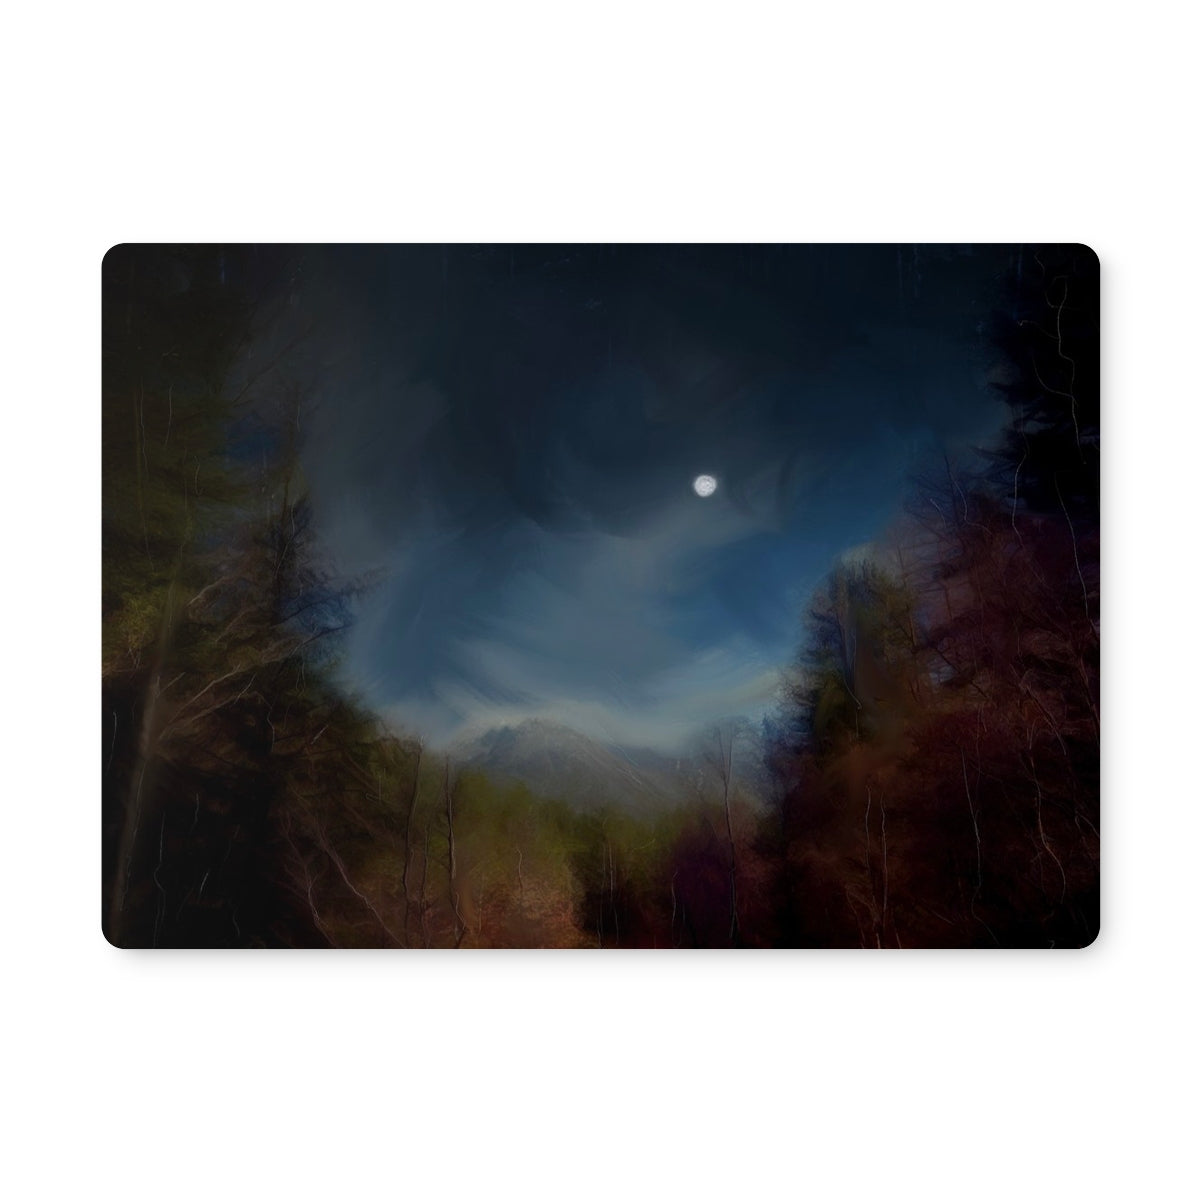 Glencoe Lochan Moonlight Art Gifts Placemat-Placemats-Scottish Lochs & Mountains Art Gallery-4 Placemats-Paintings, Prints, Homeware, Art Gifts From Scotland By Scottish Artist Kevin Hunter